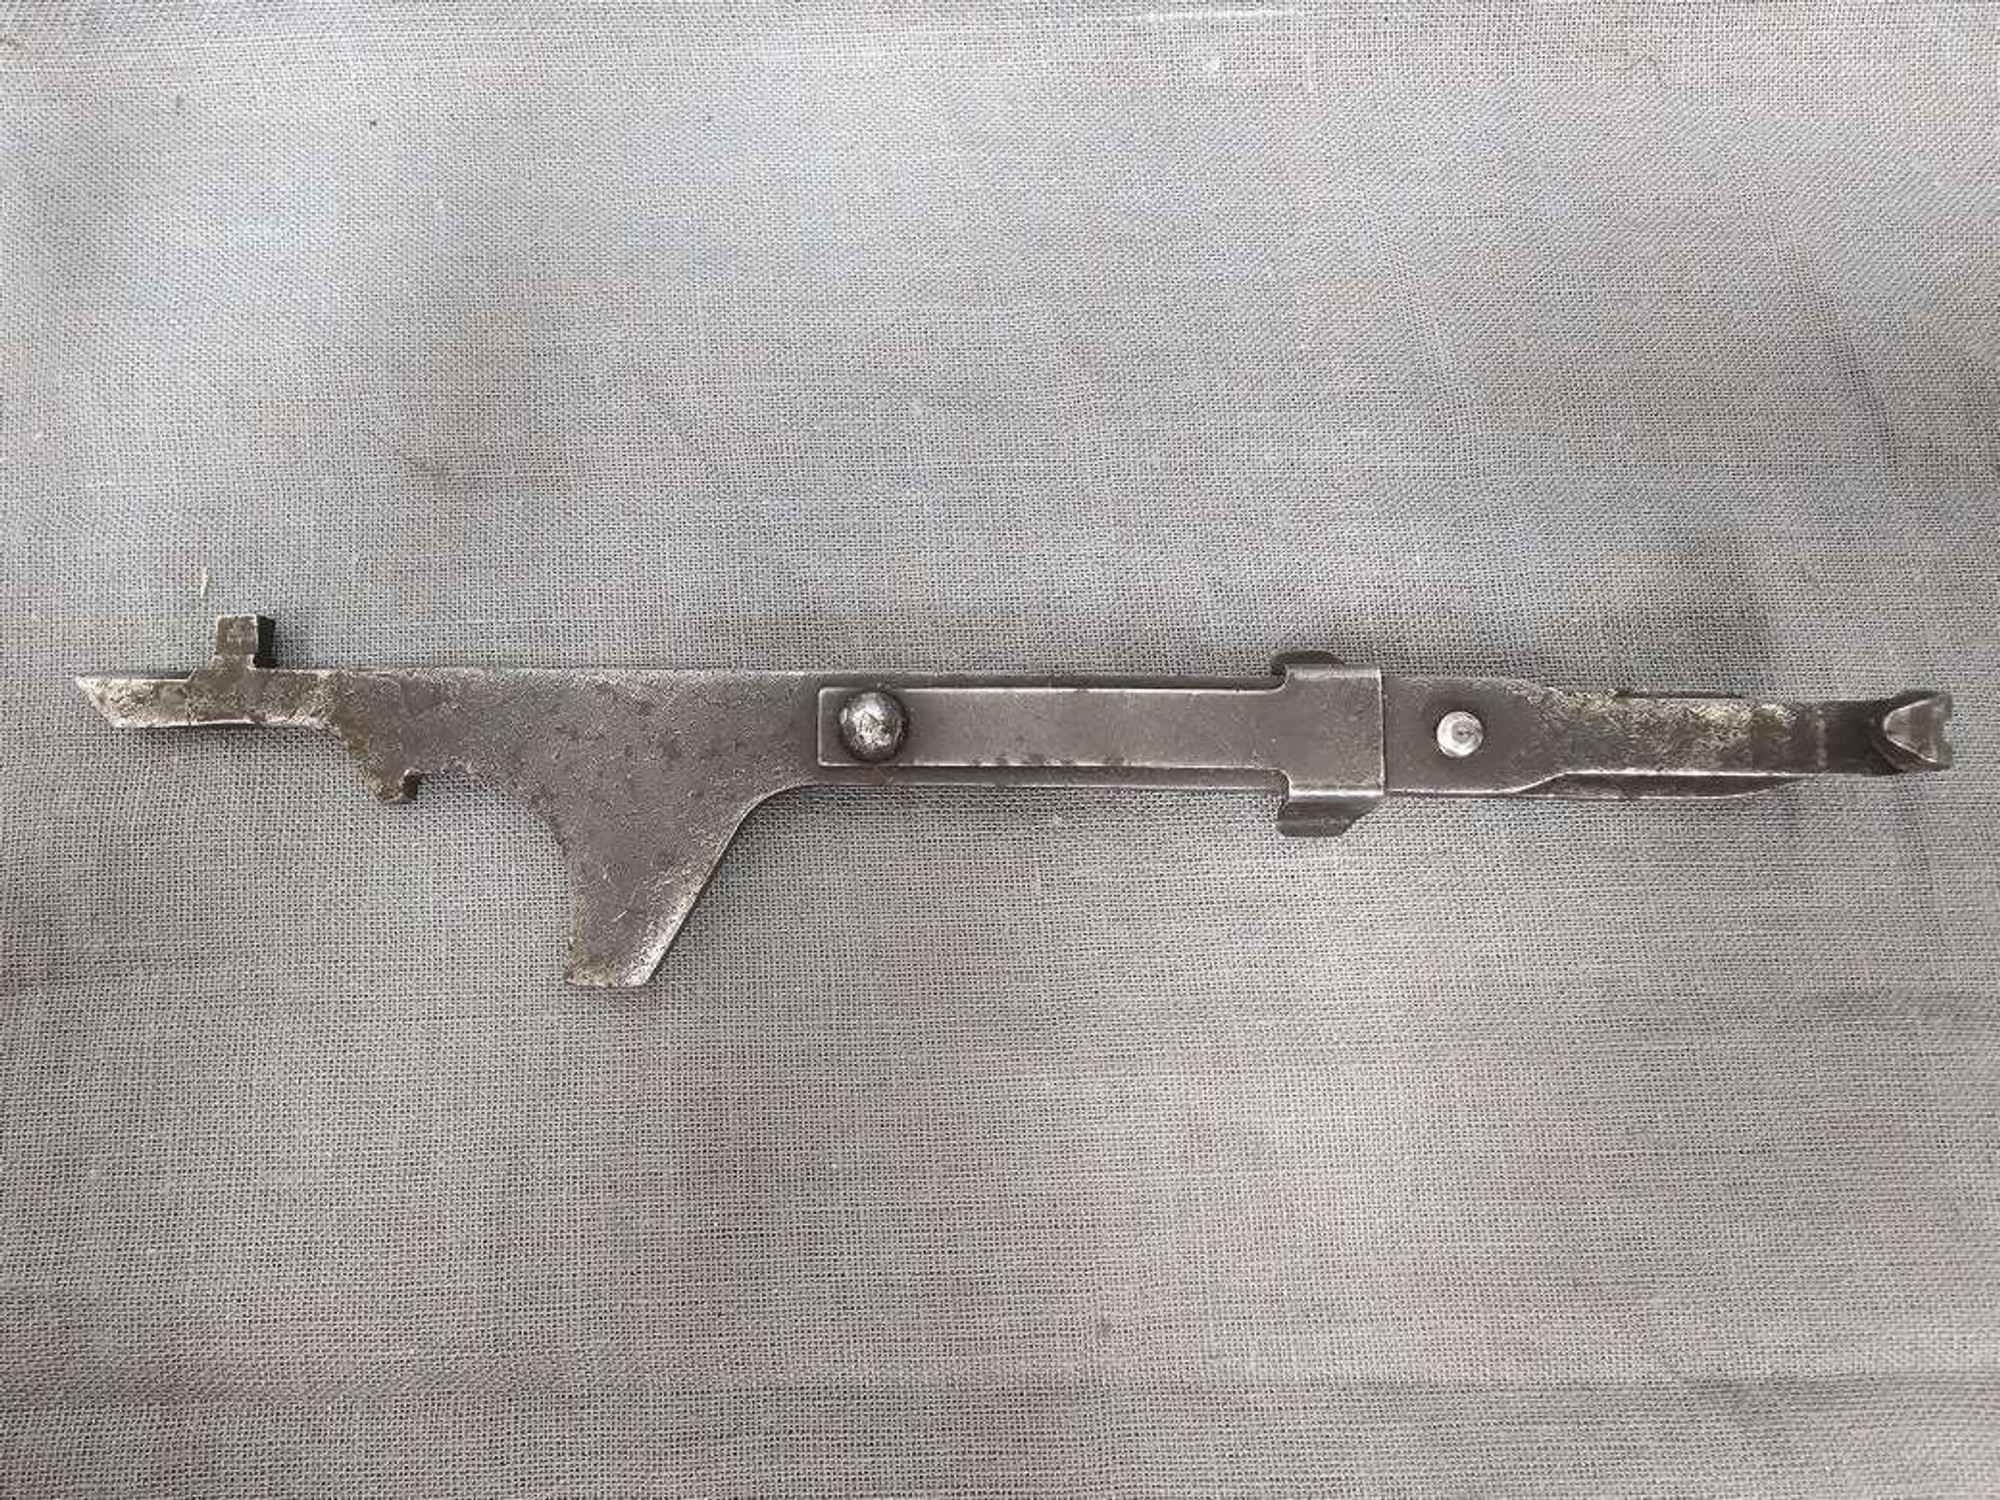 Canadian Armed Forces C1/L1A1/FN-FAL Assembly/Disassembly Tool